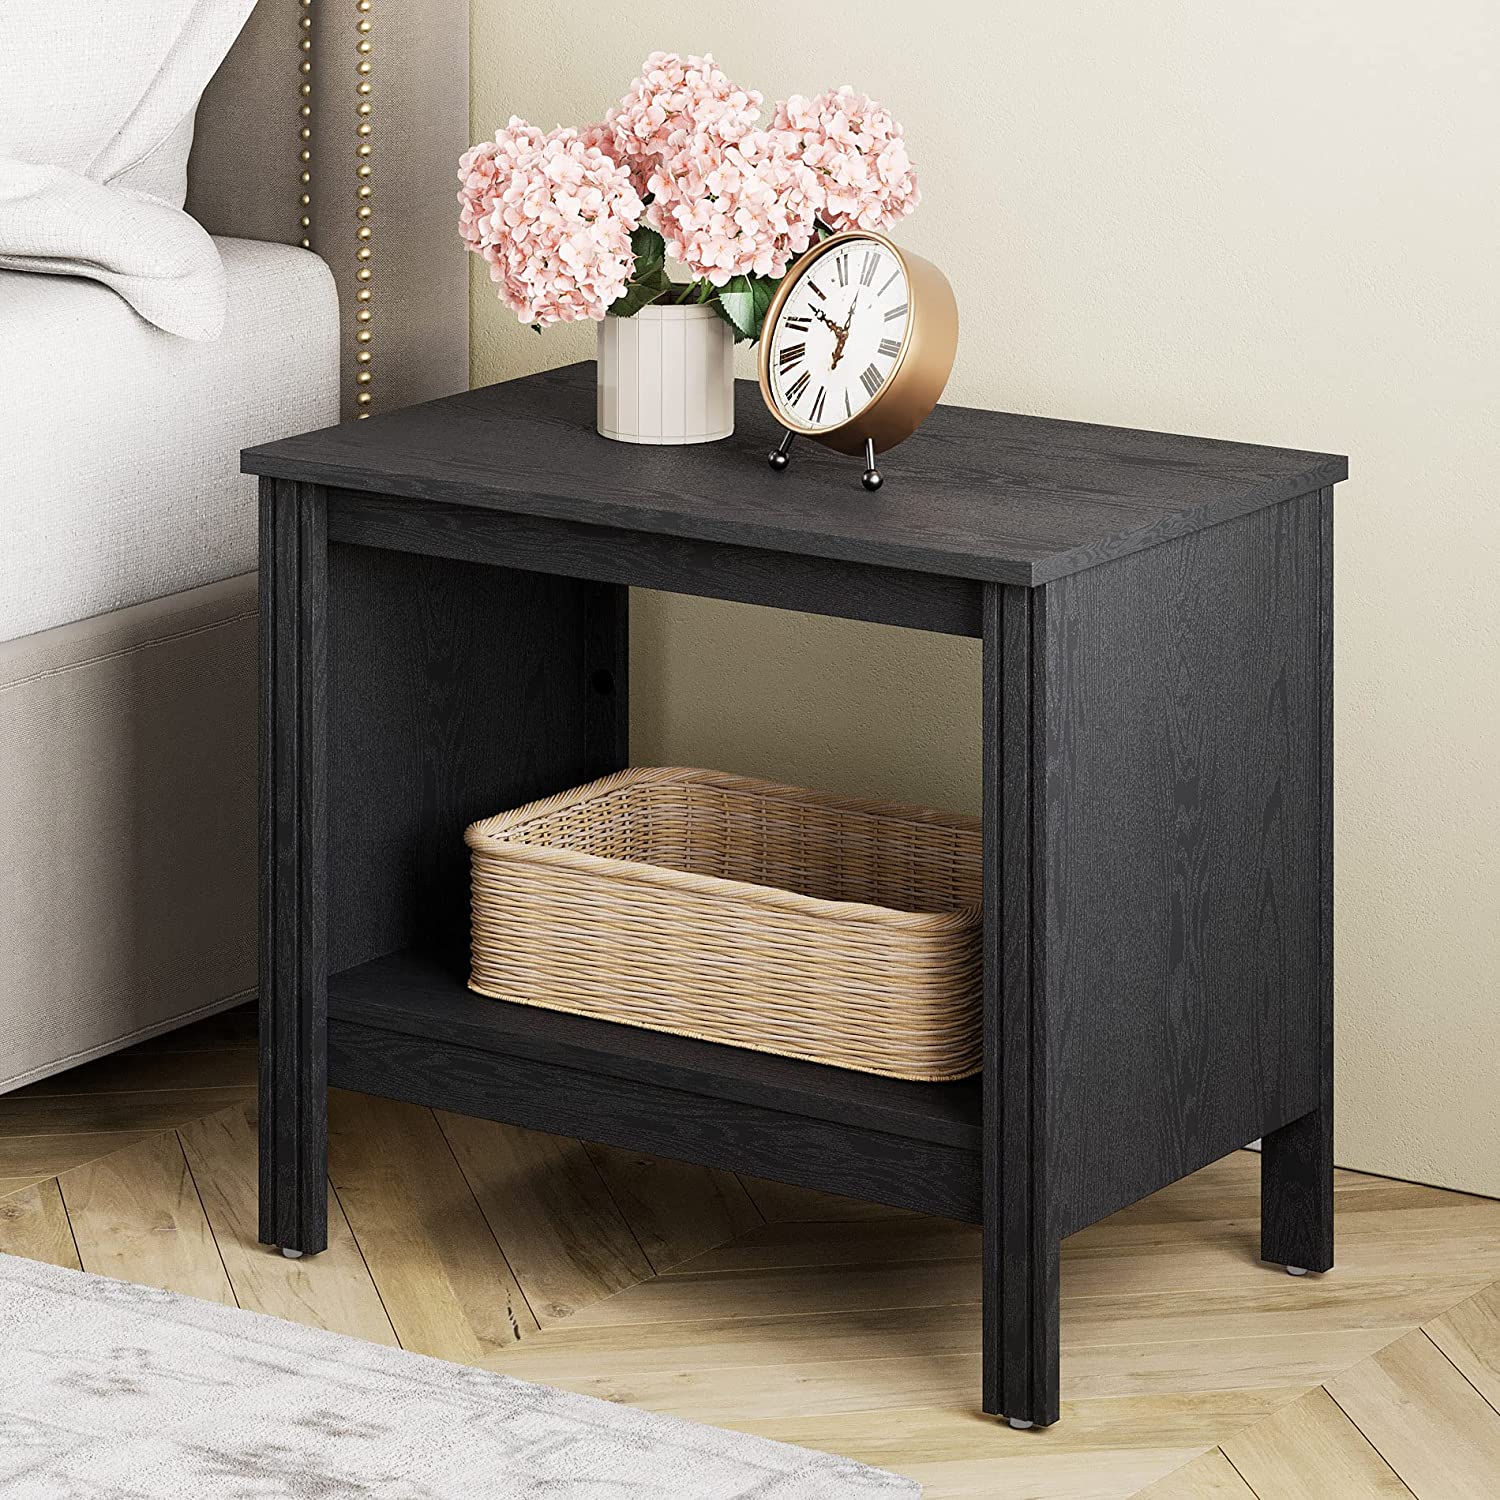 A Pair of End Tables- narrow wood tables with shelf